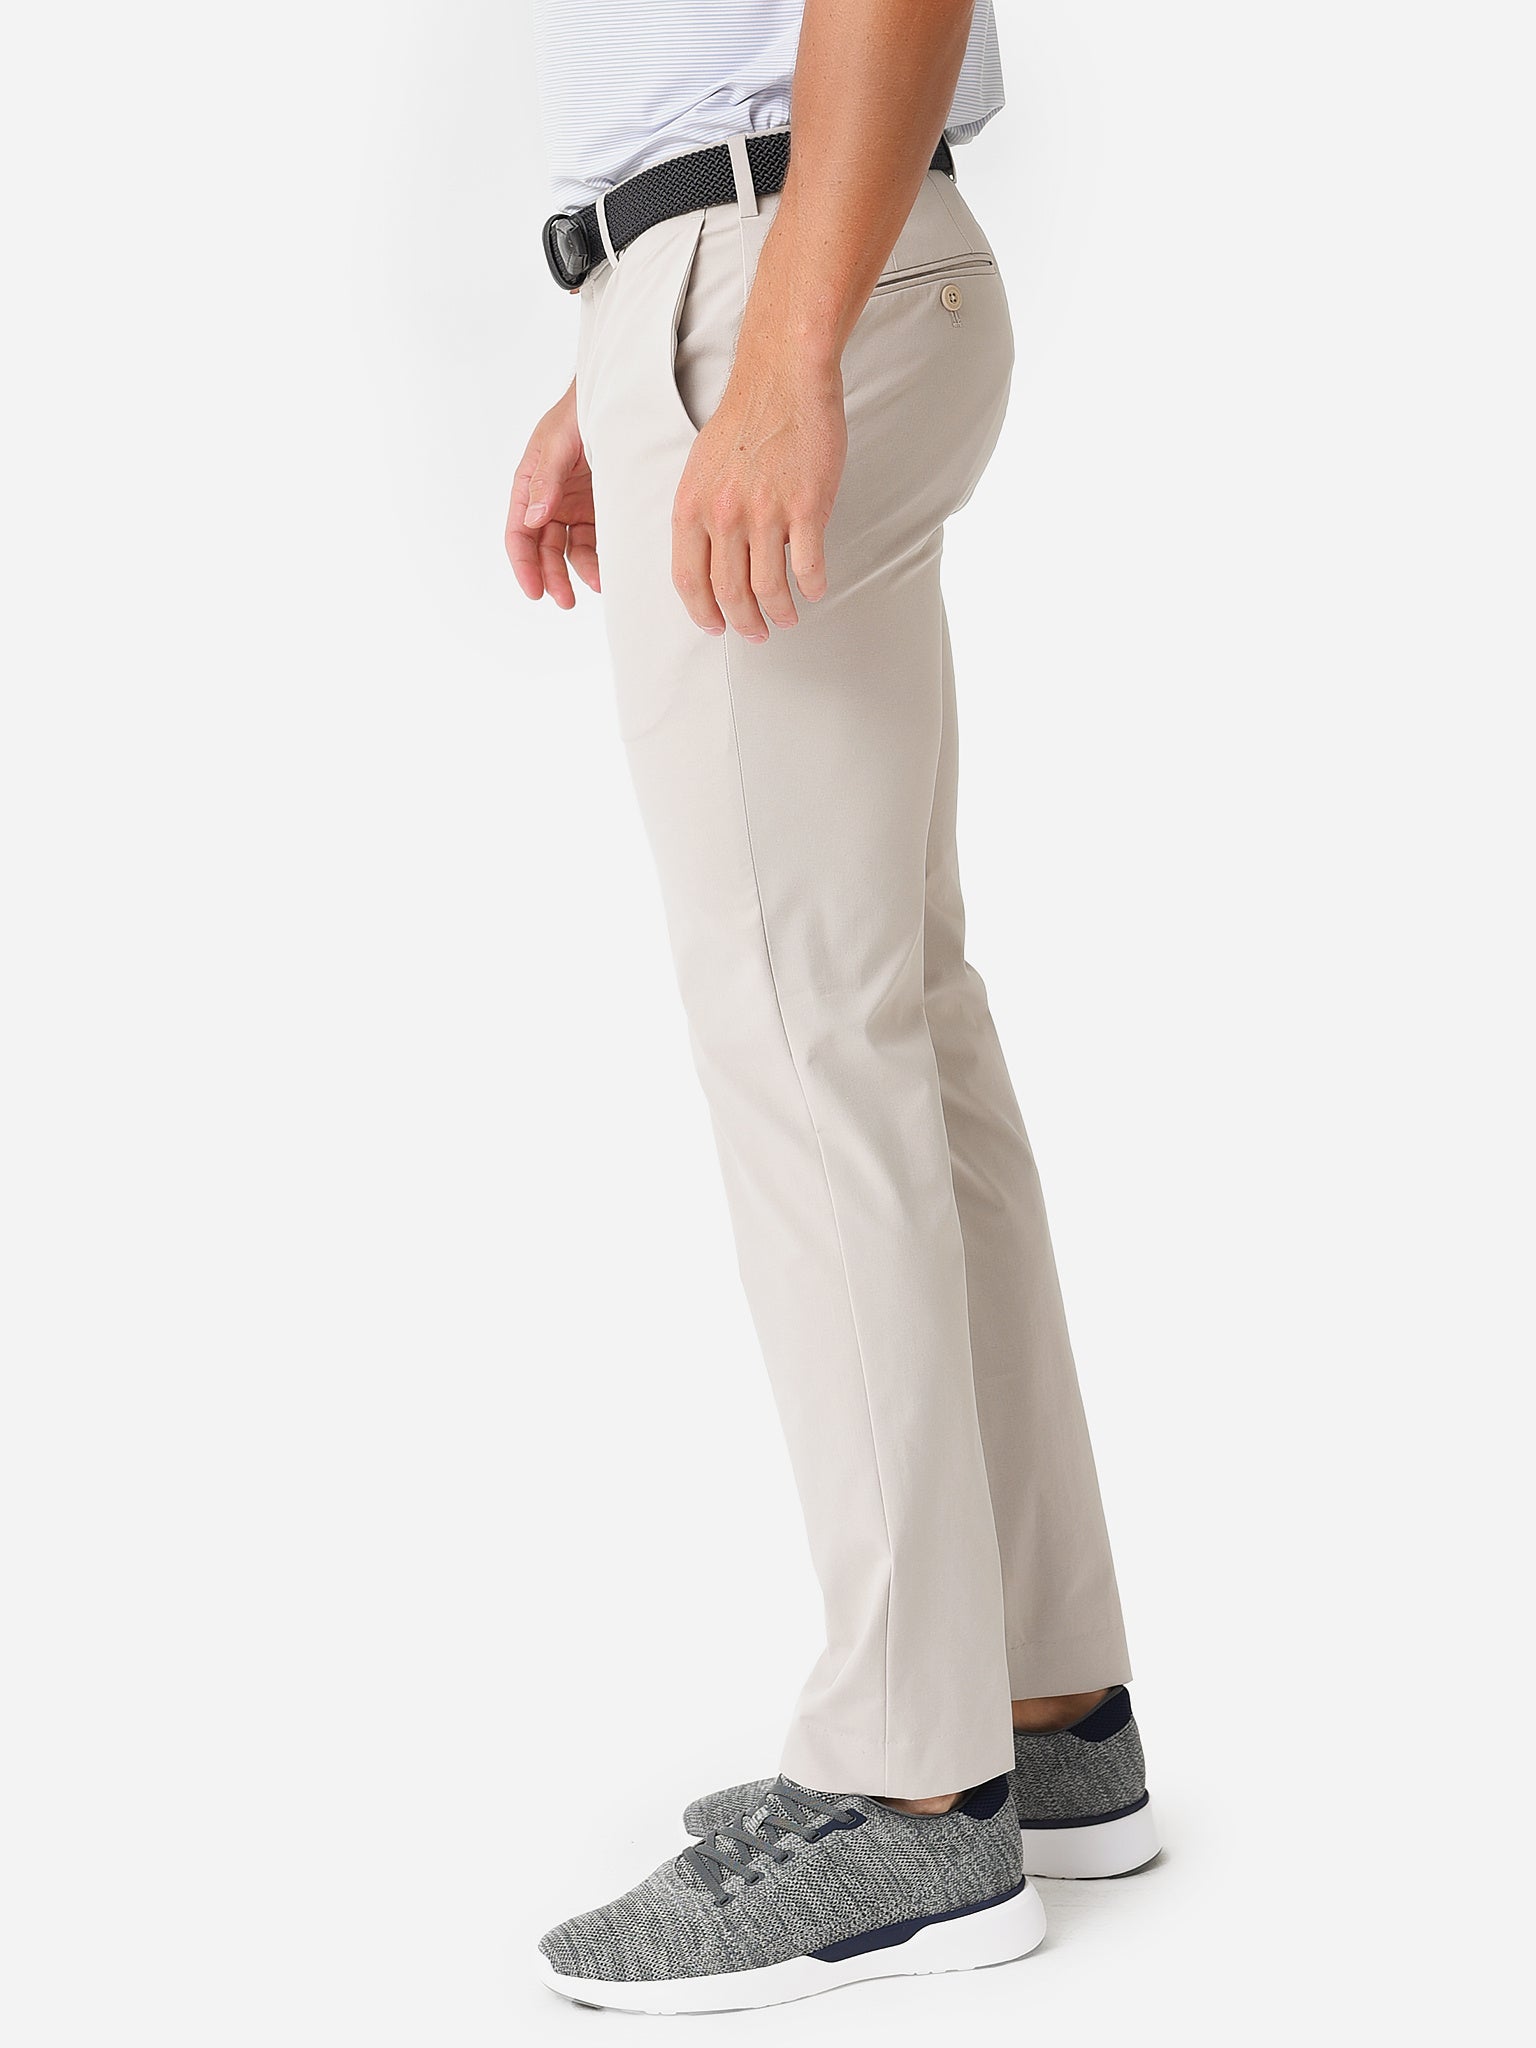 Peter Millar Surge Performance Trouser - Gale – The Lucky Knot Men's